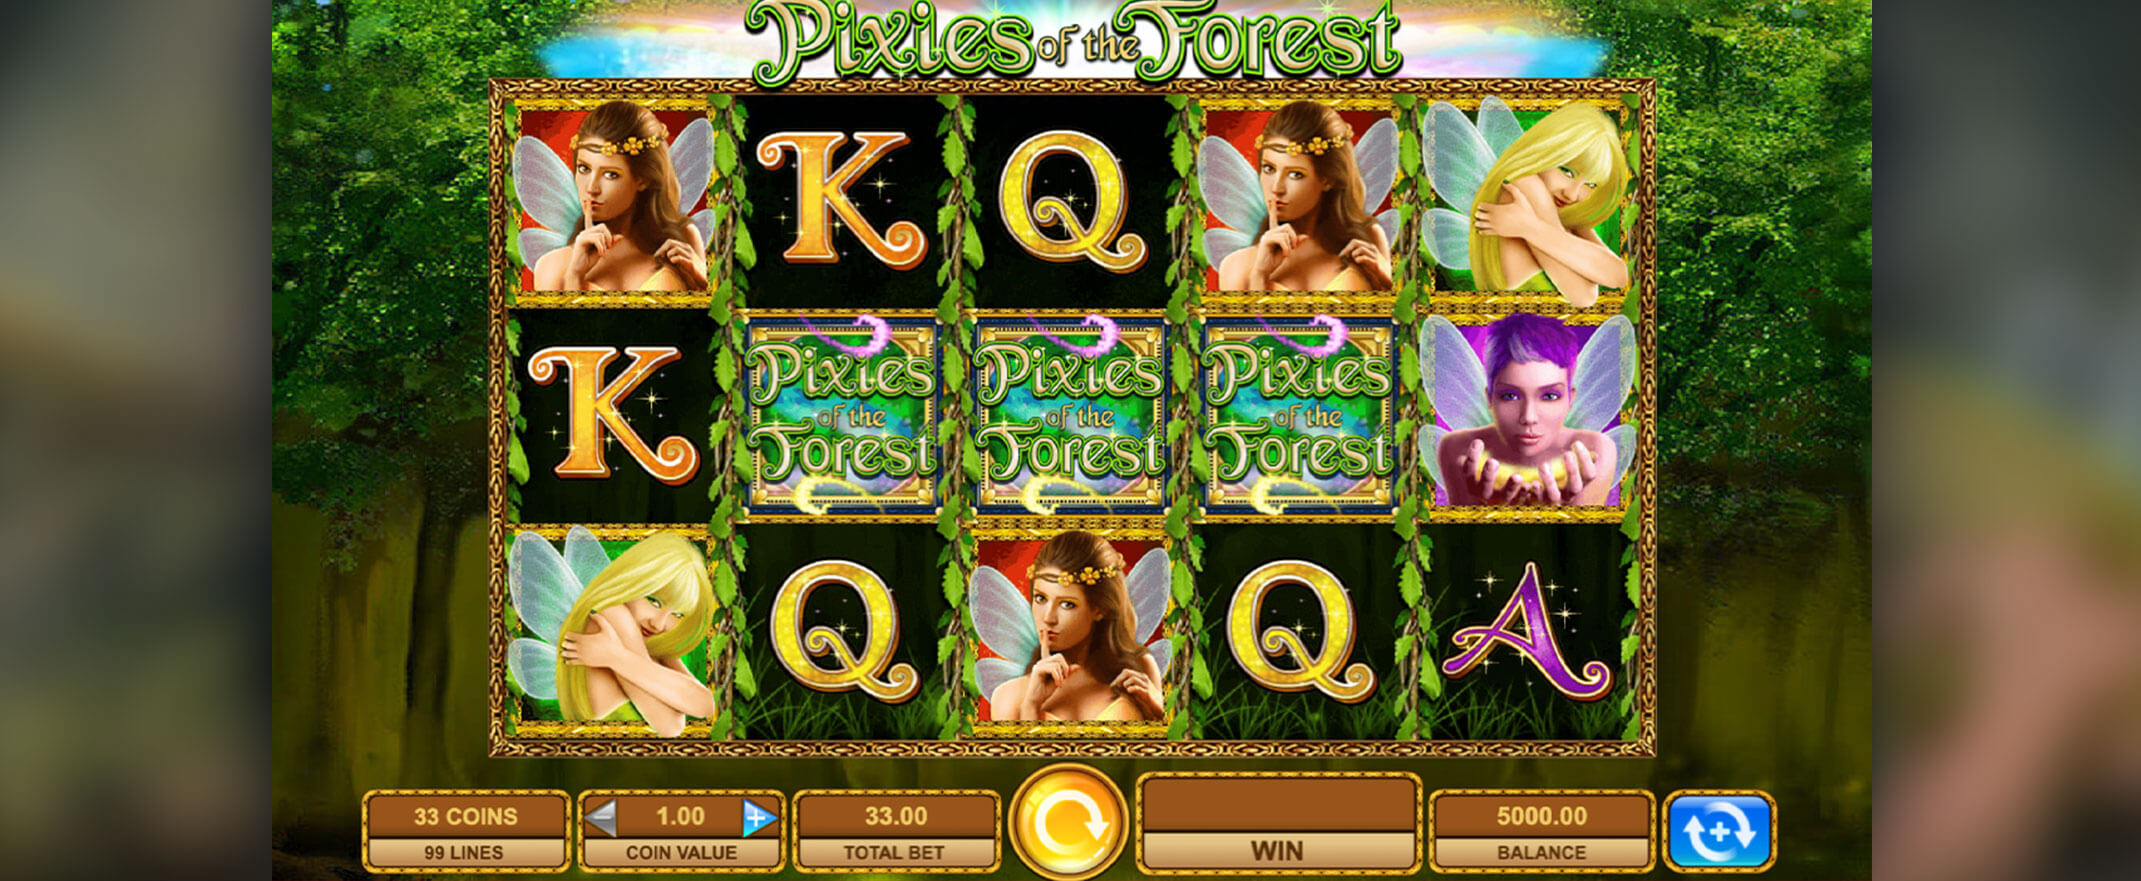 Pixies Of The Forest slot